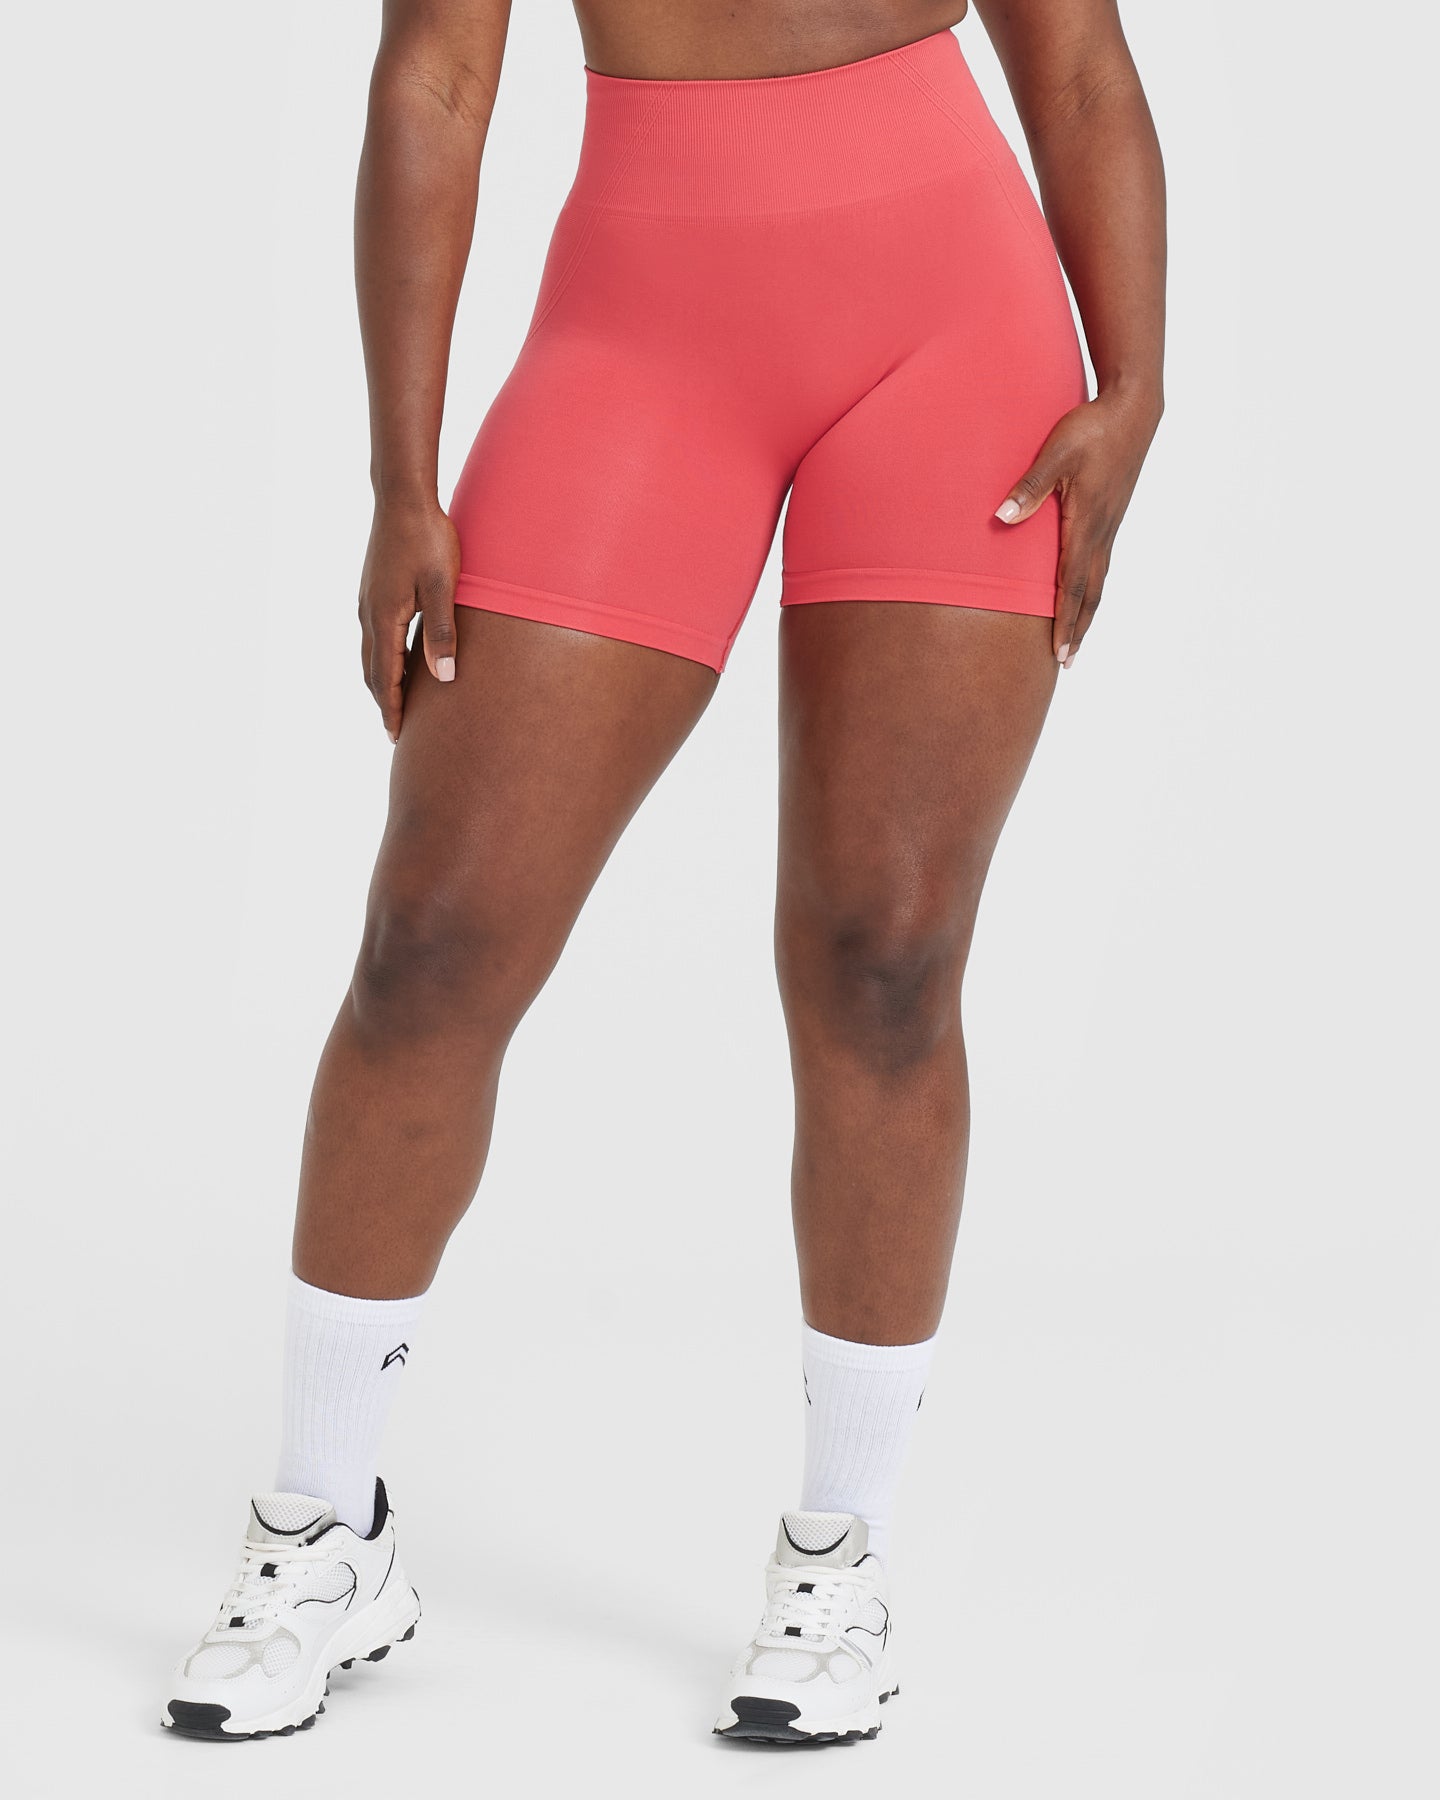 Red Seamless Shorts Women's - Sweet Red